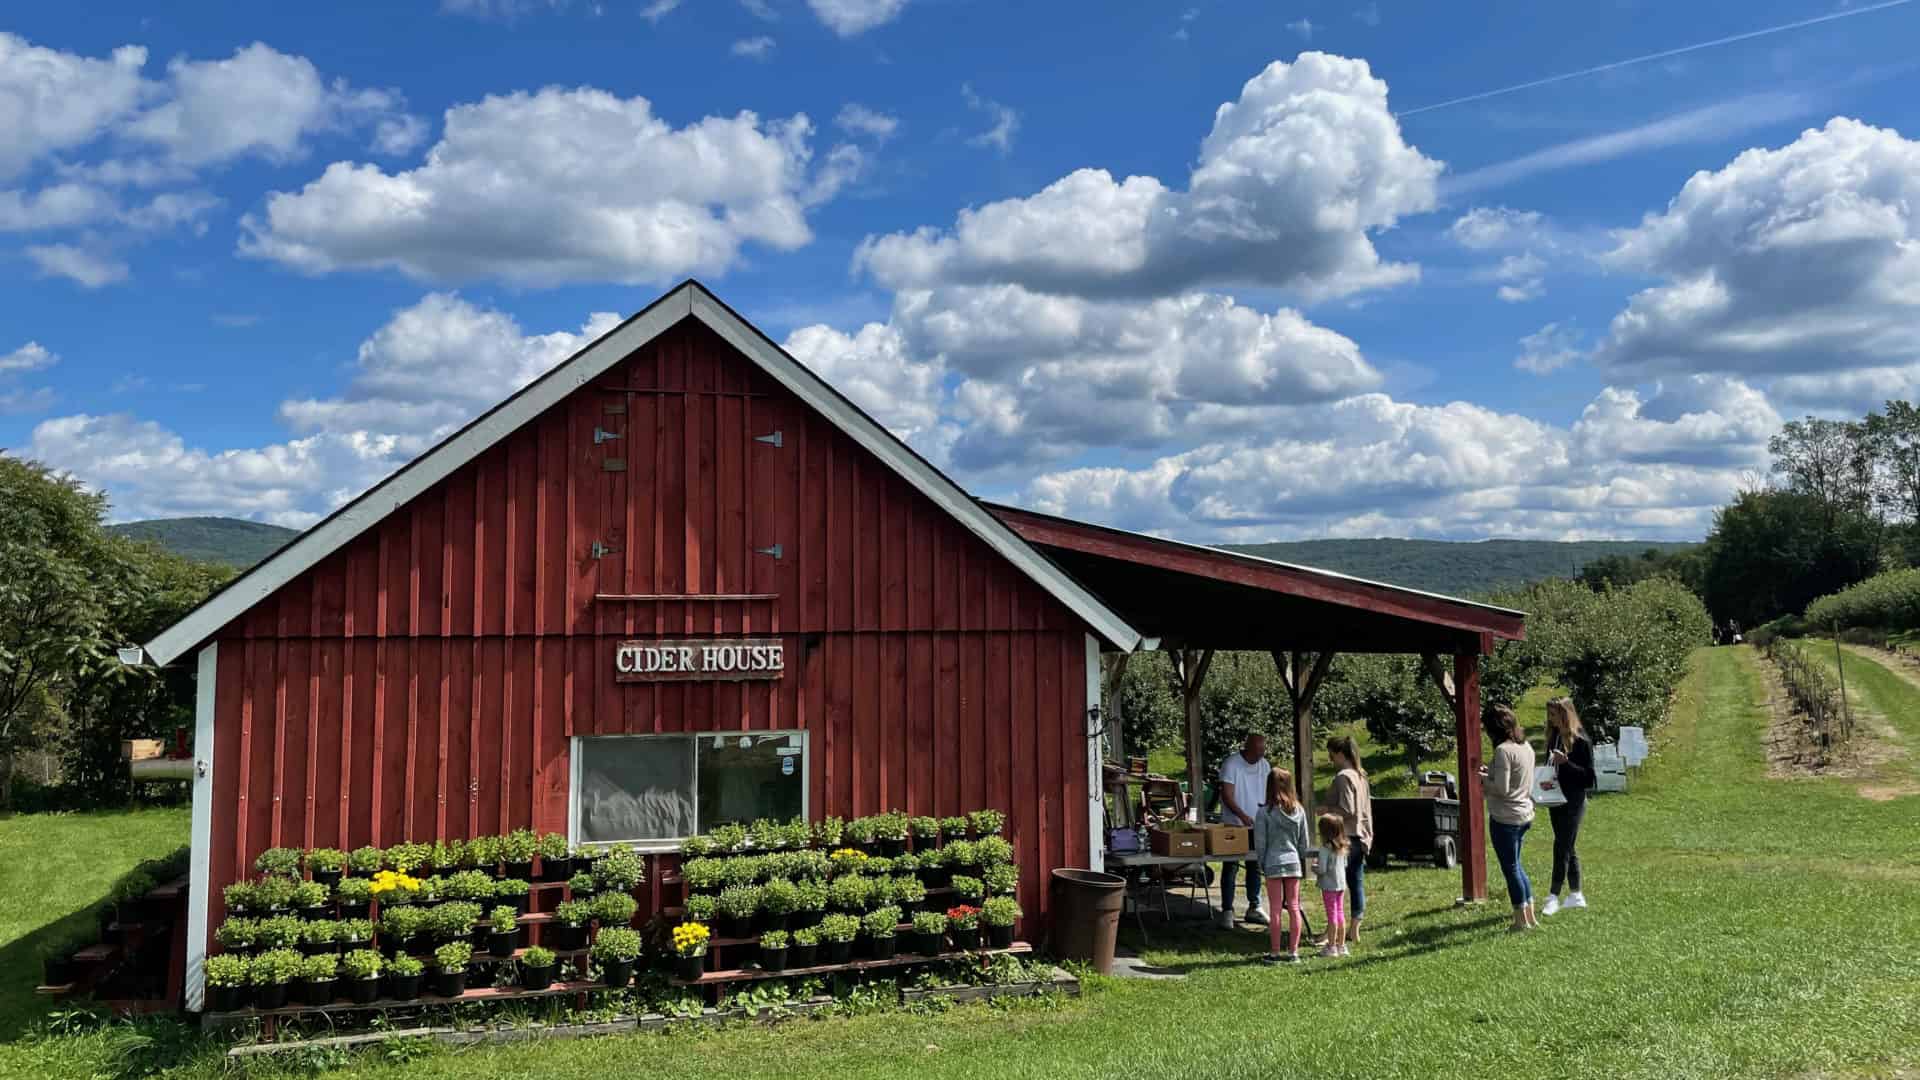 A family waits in the sun by the cider house at Lakeview Orchards in Lanesborough.